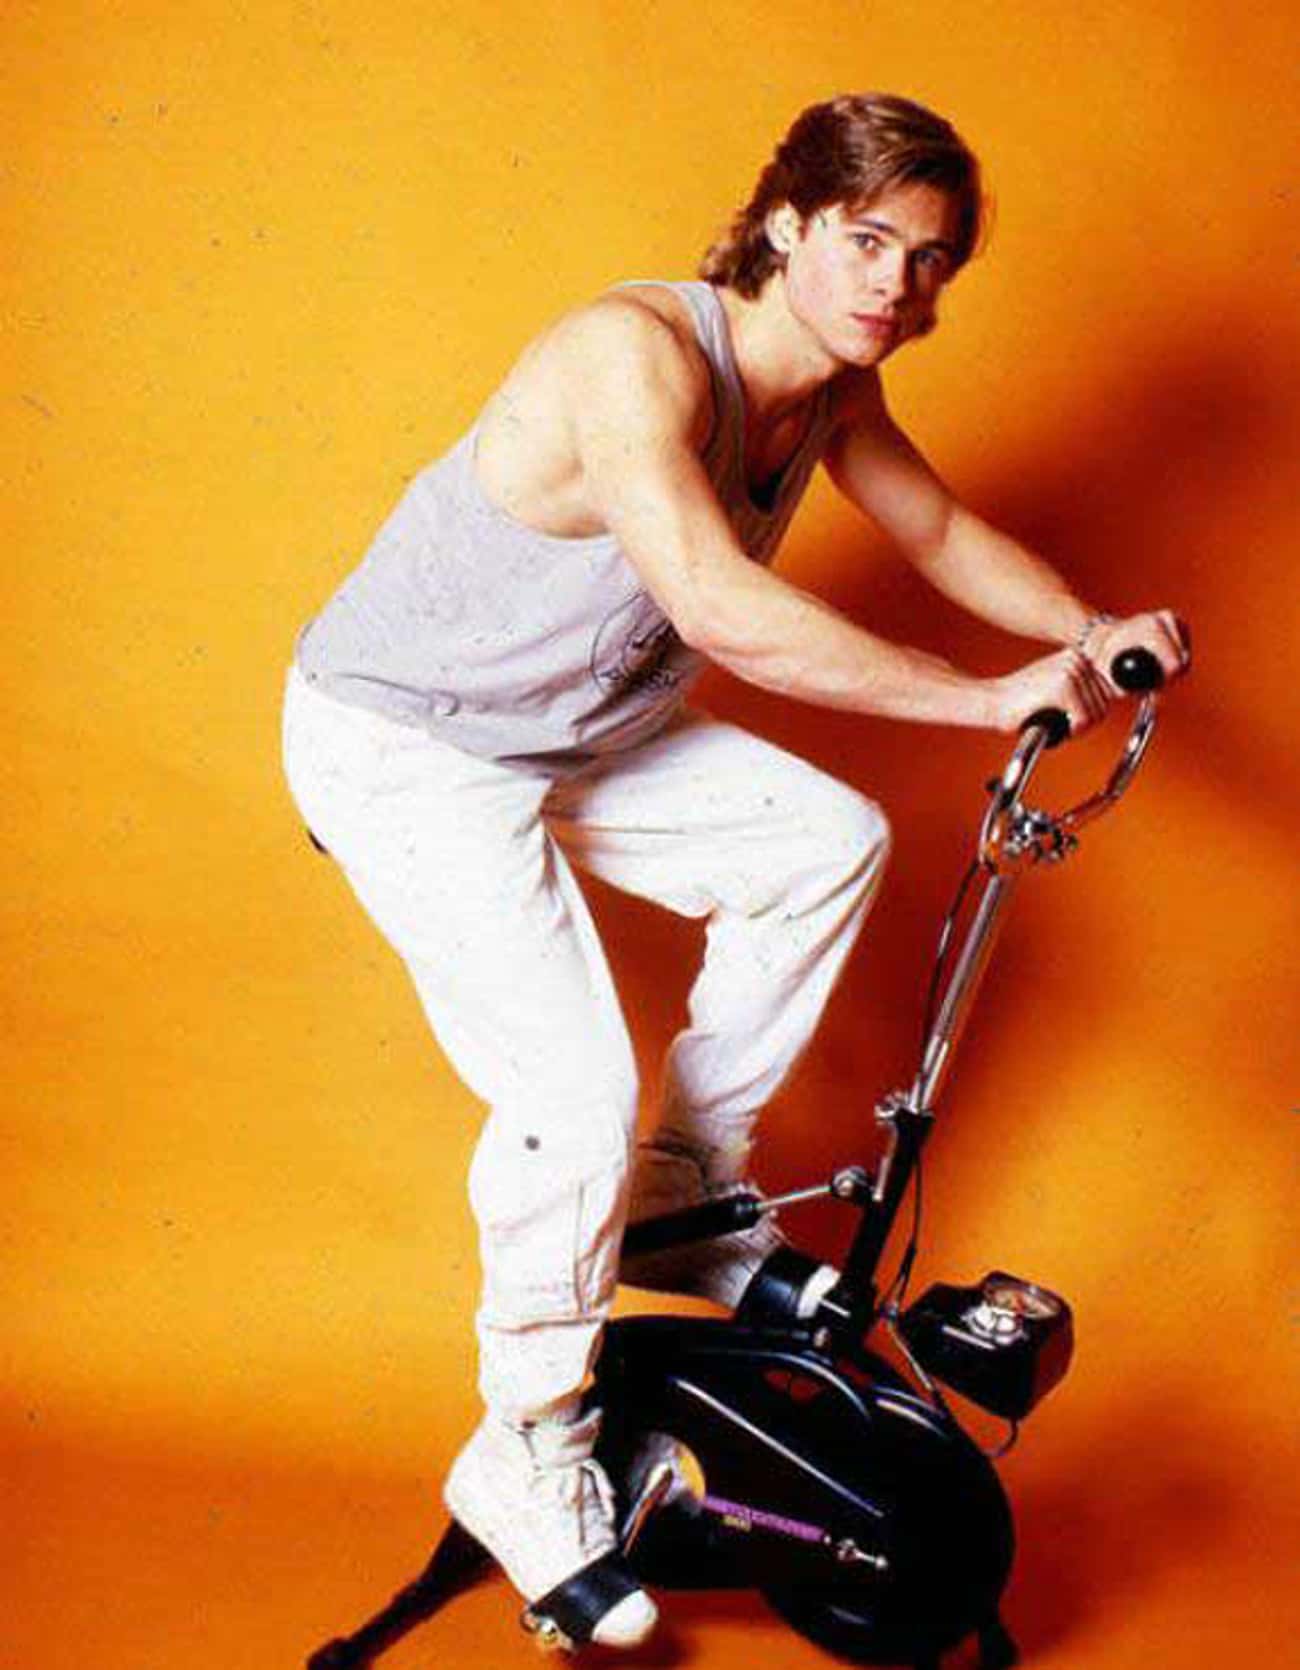 A Rare Photo of Young Brad Pitt Leading a SoulCycle Class